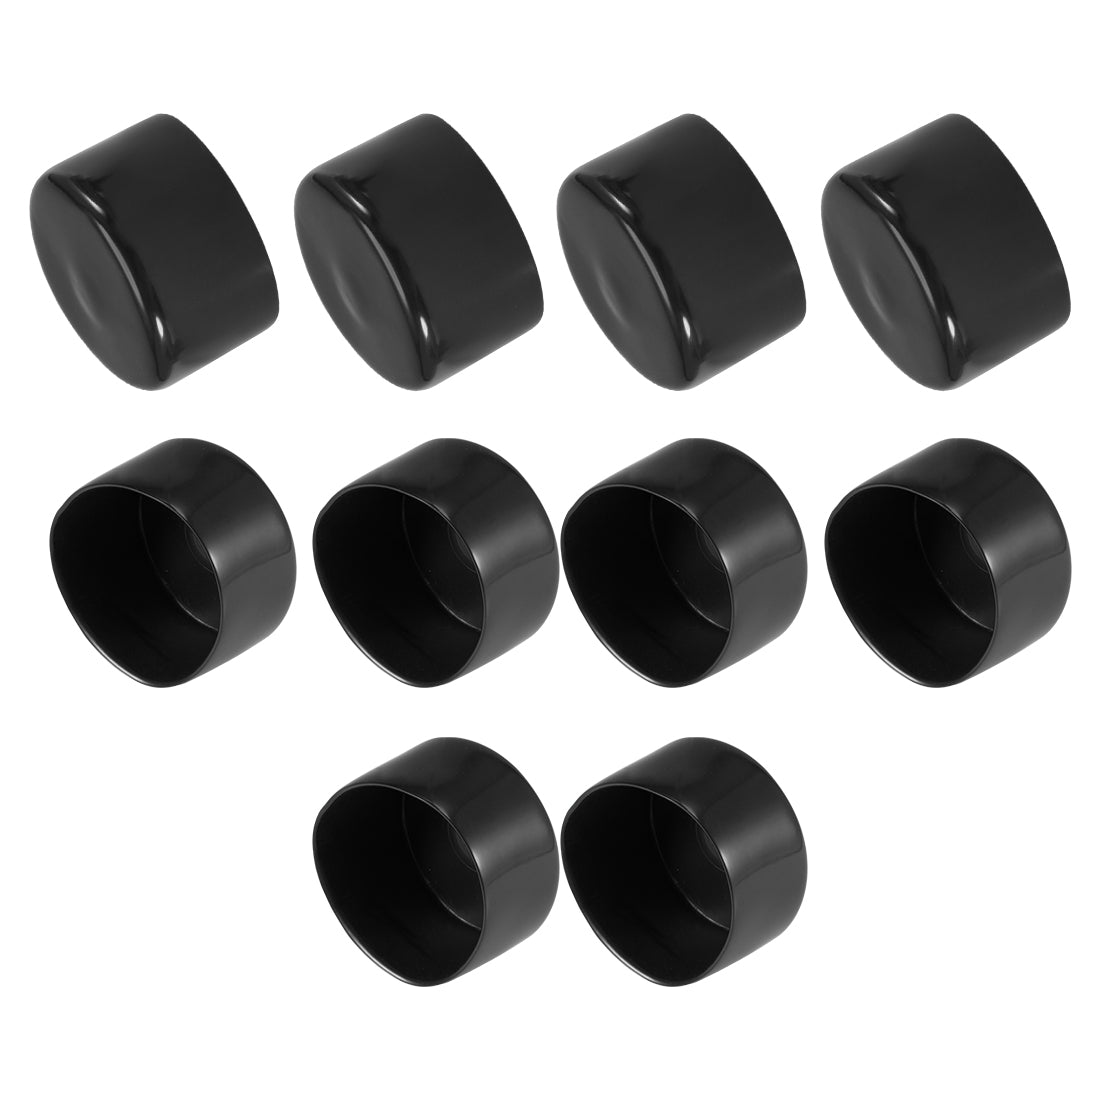 uxcell Uxcell 10pcs Rubber End Caps 50mm ID 40mm Height Screw Thread Protectors Black